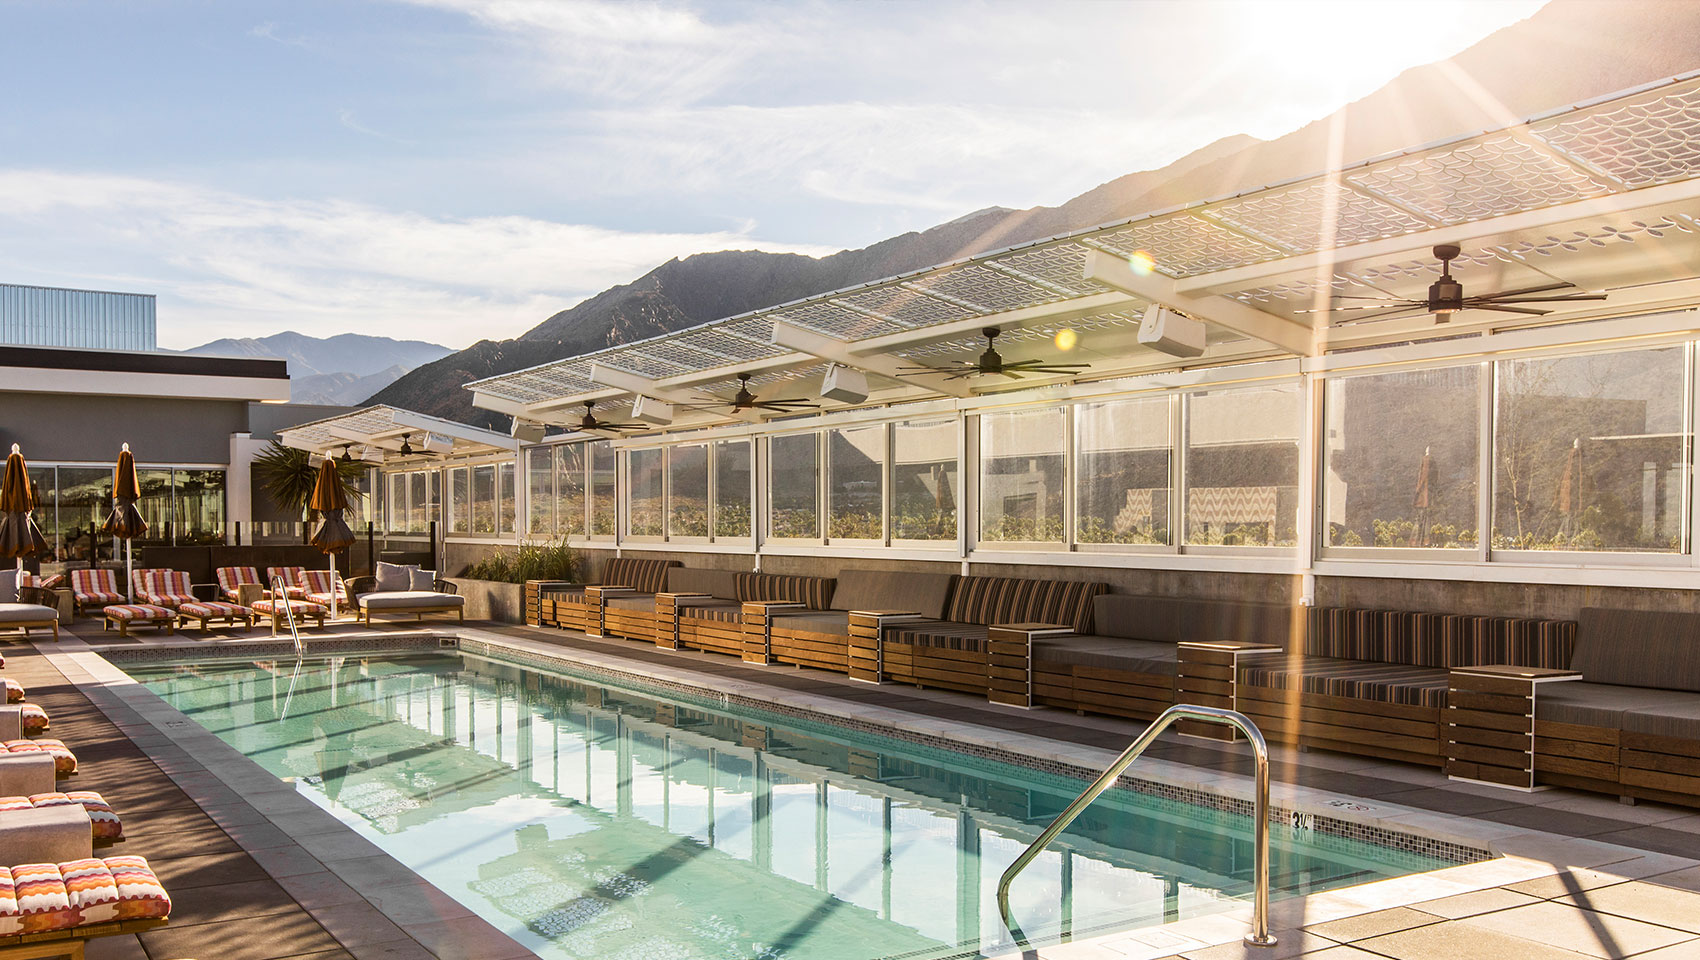 Rowan Palm Spring Pool Deck with Day Beds overlooking the mountains